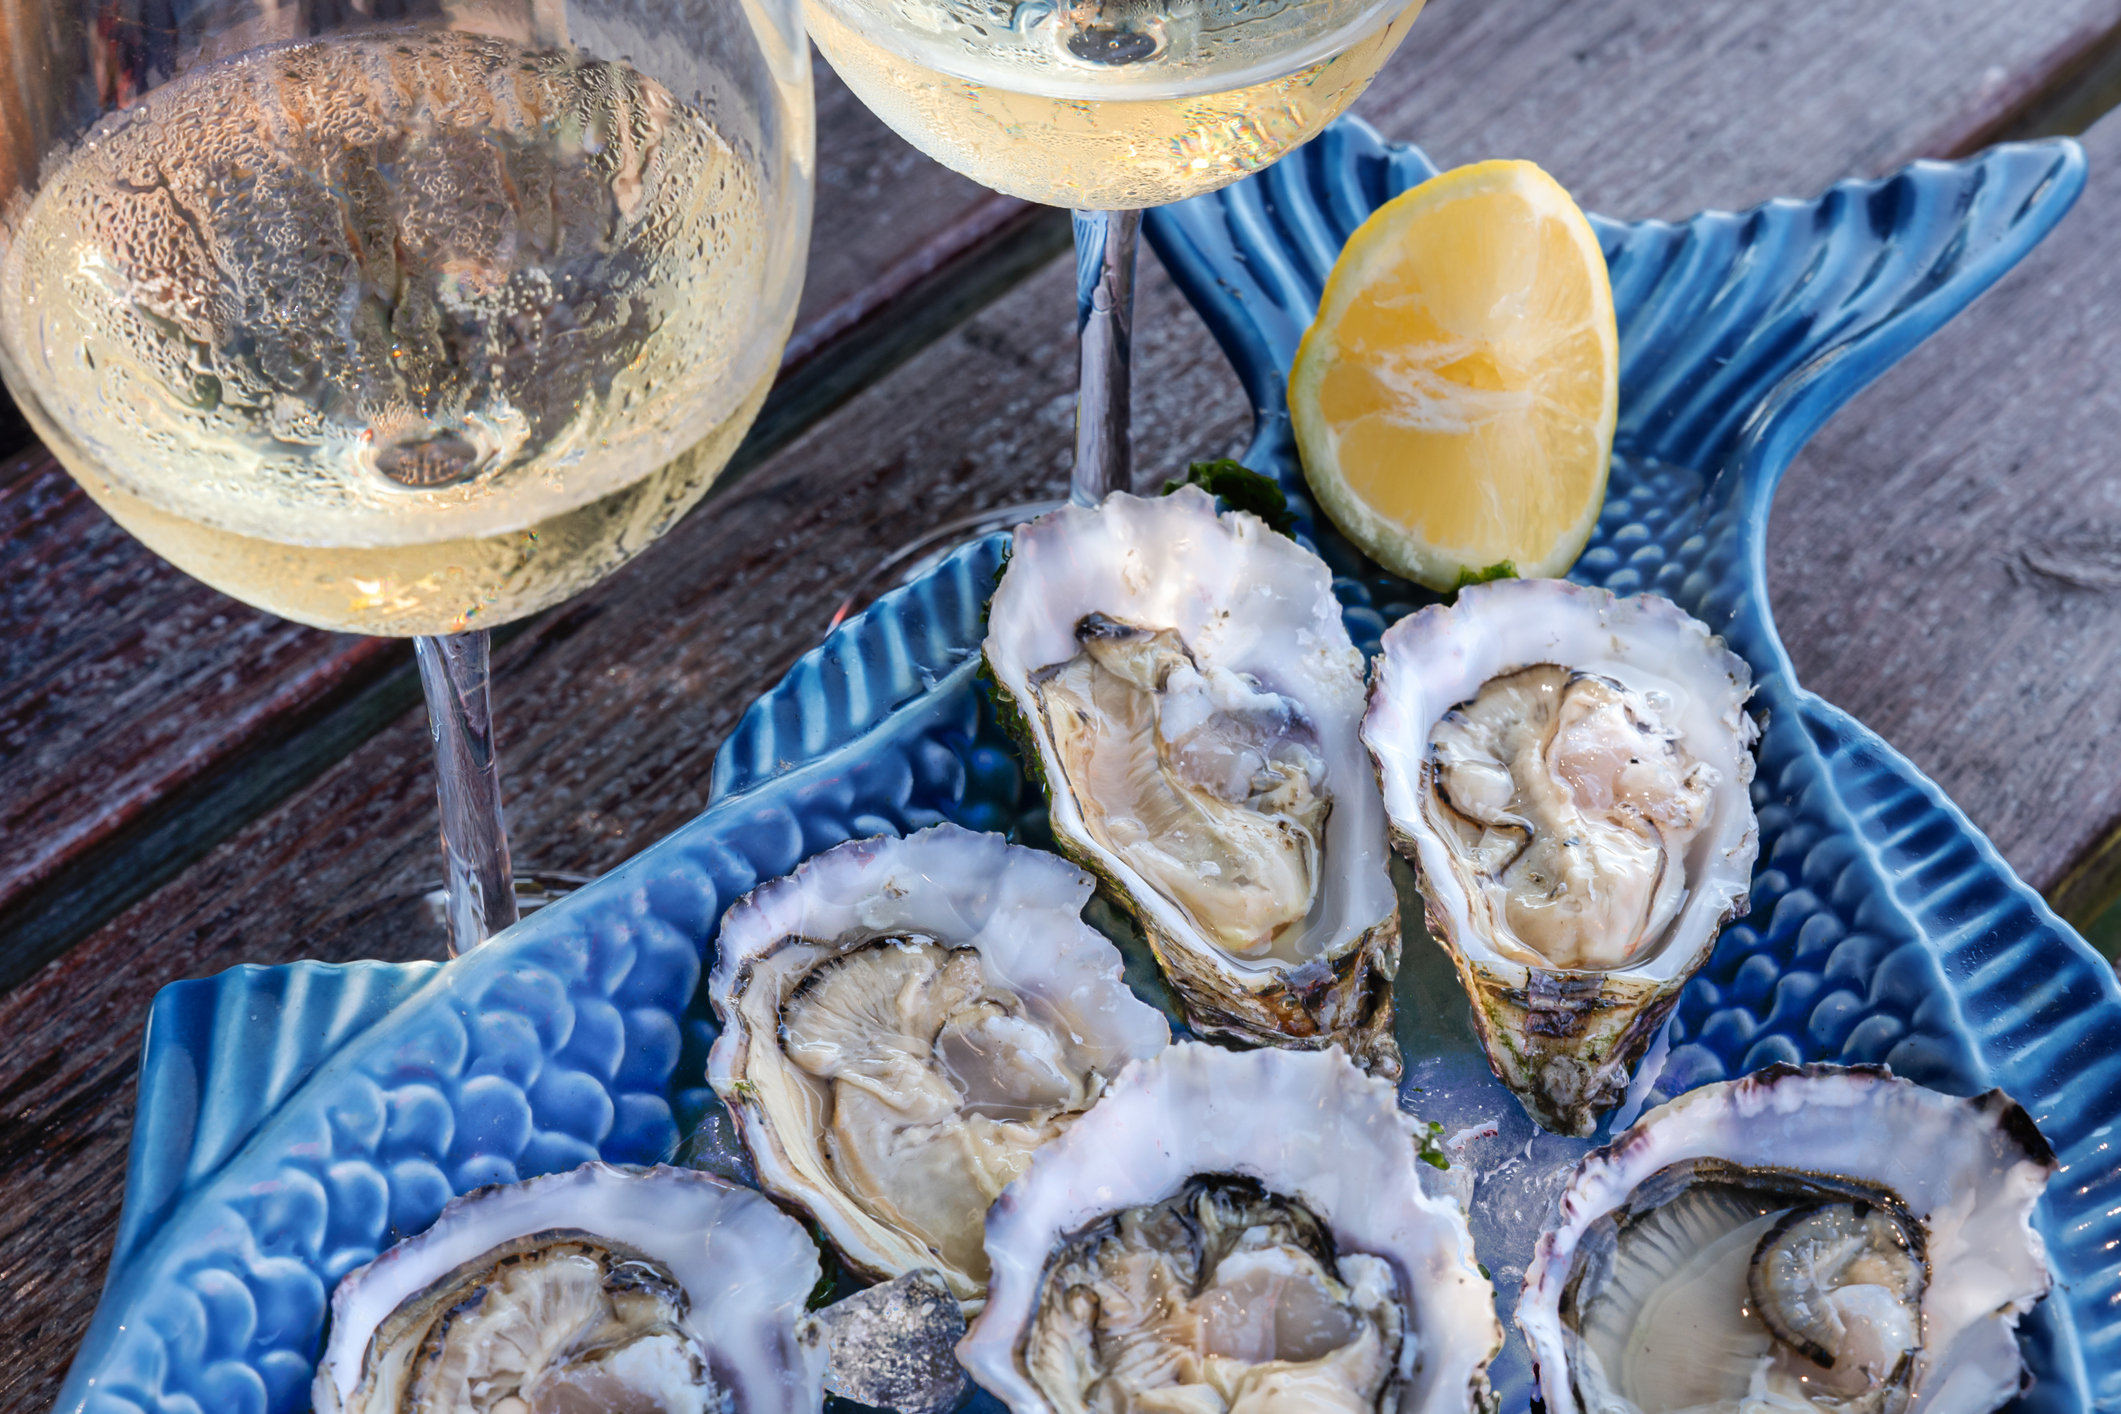 Enjoy fabulous fresh oysters and wine while supporting Oysterponds Elementary School